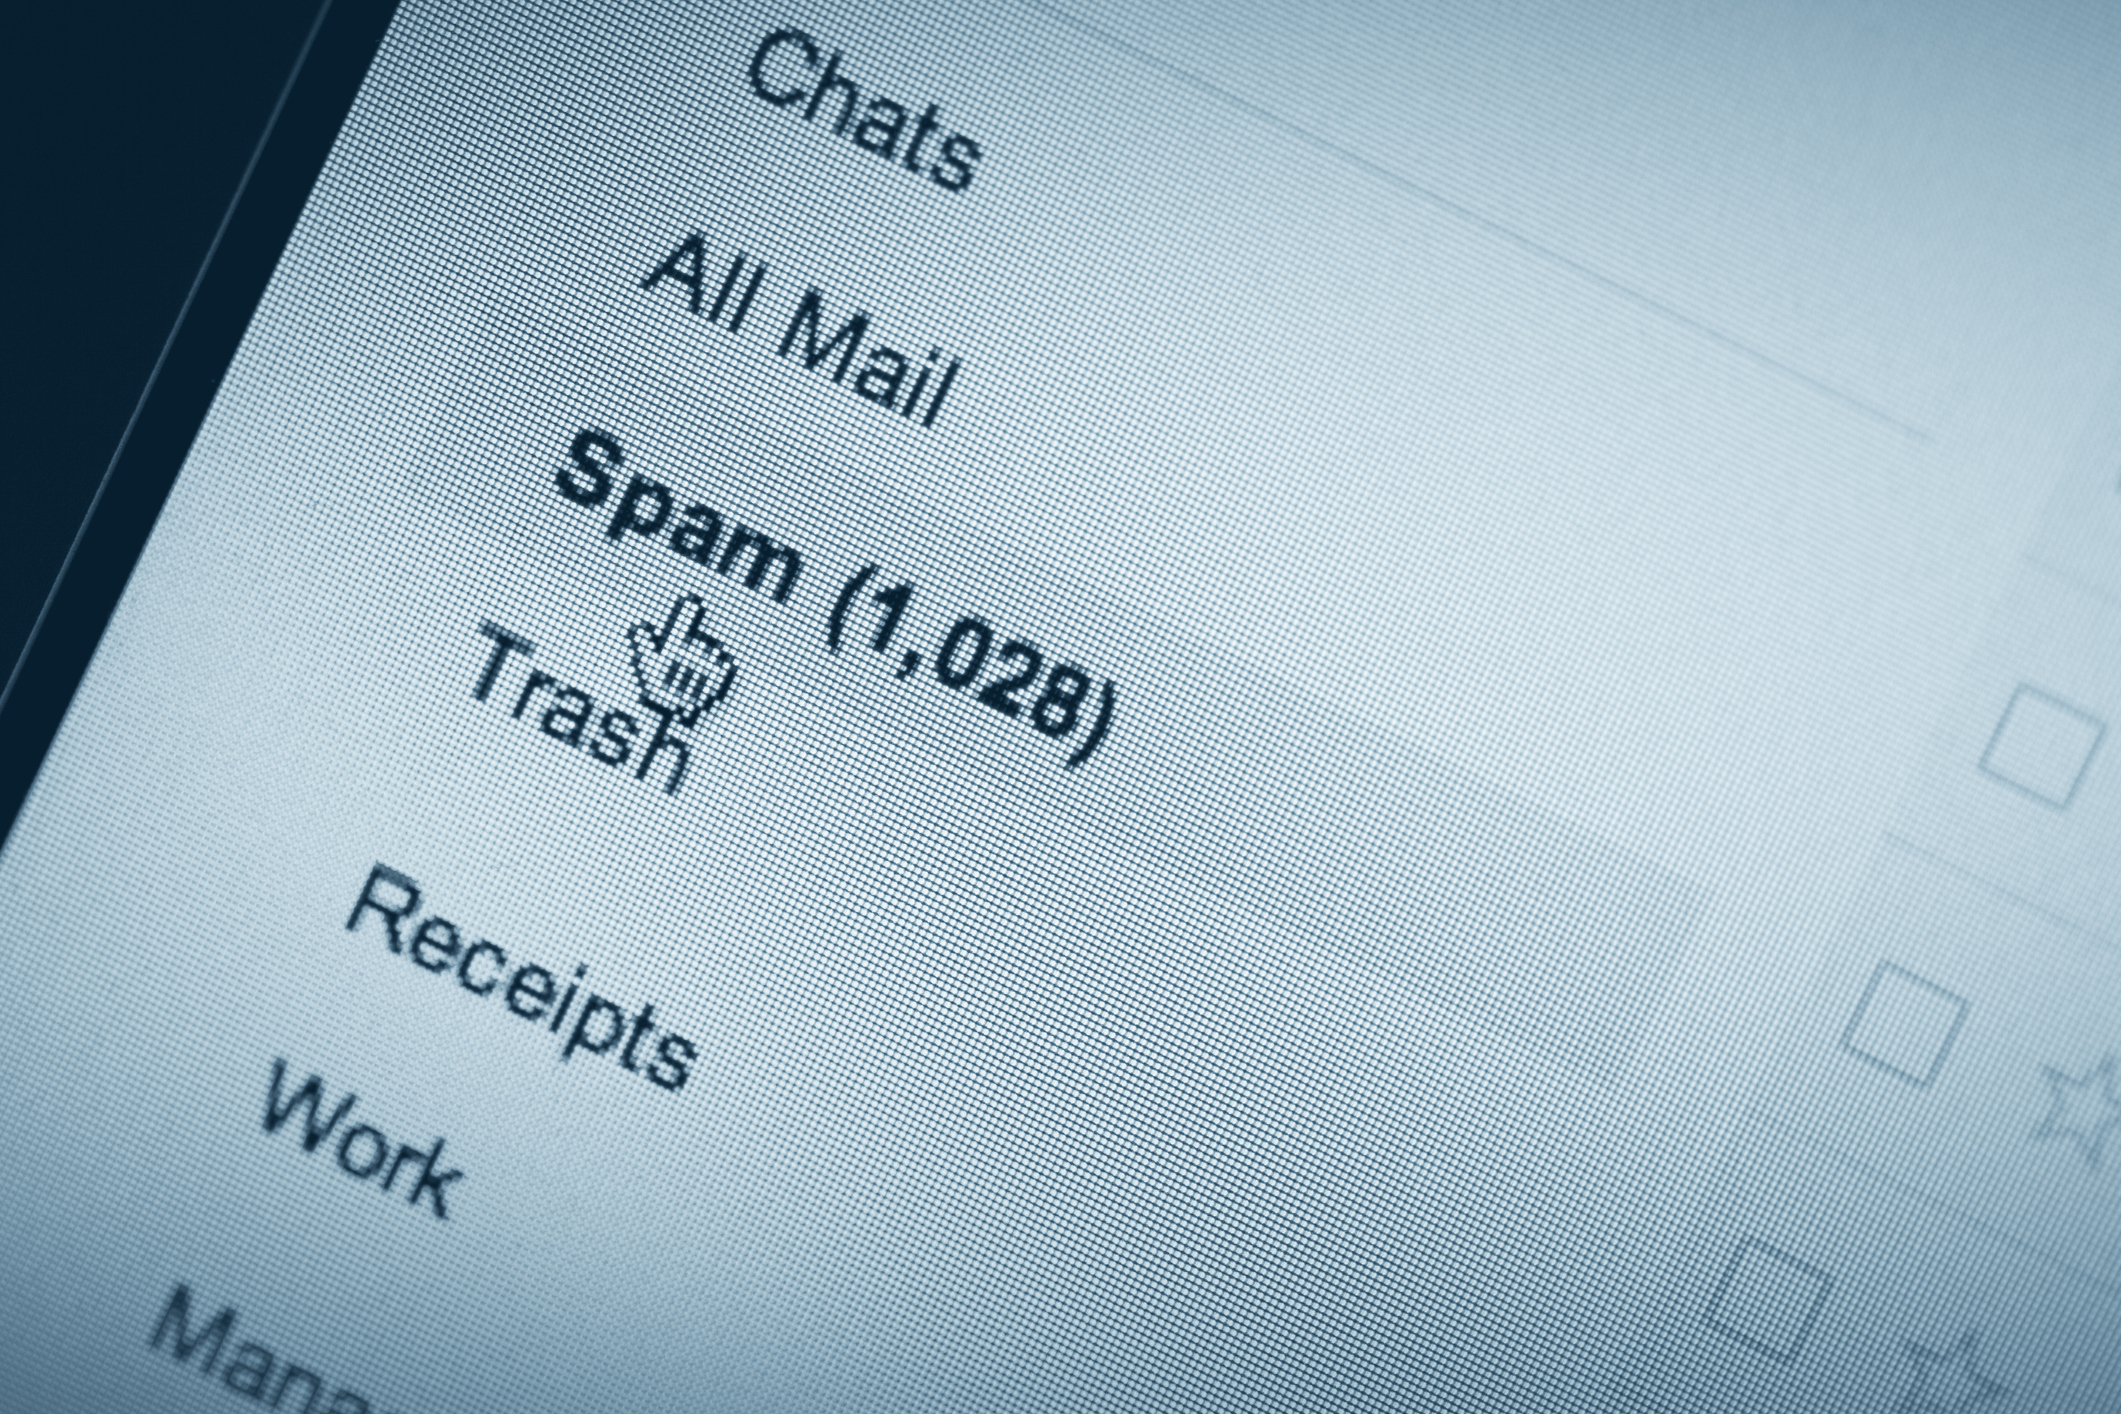 don't spam your email list